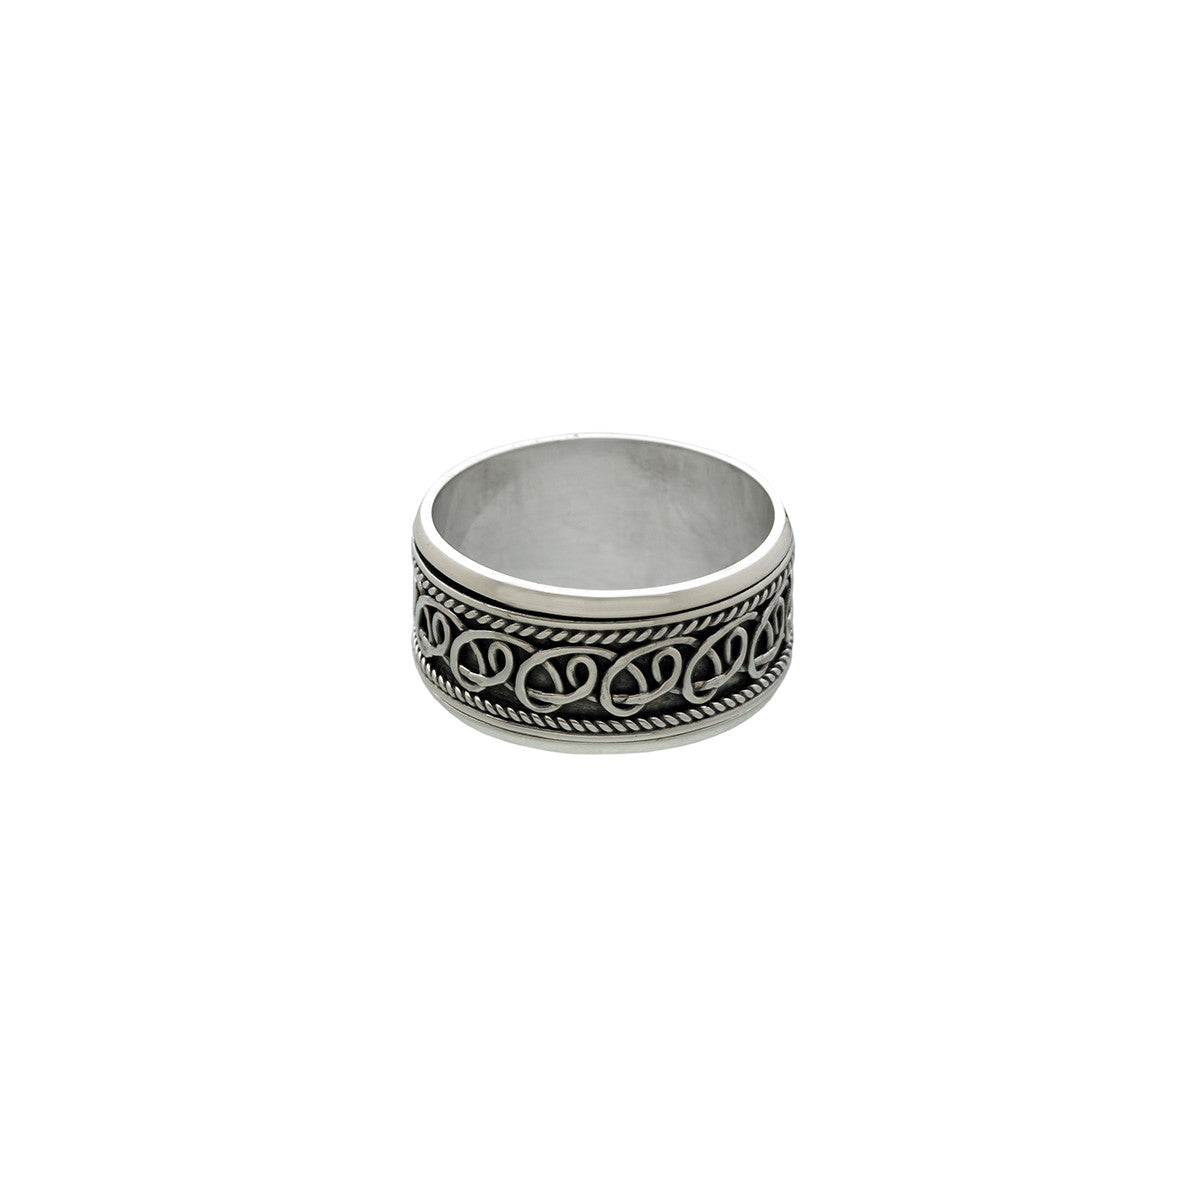 Delta Infinity Sterling Silver Spin Ring - Cynthia Gale New York Jewelry